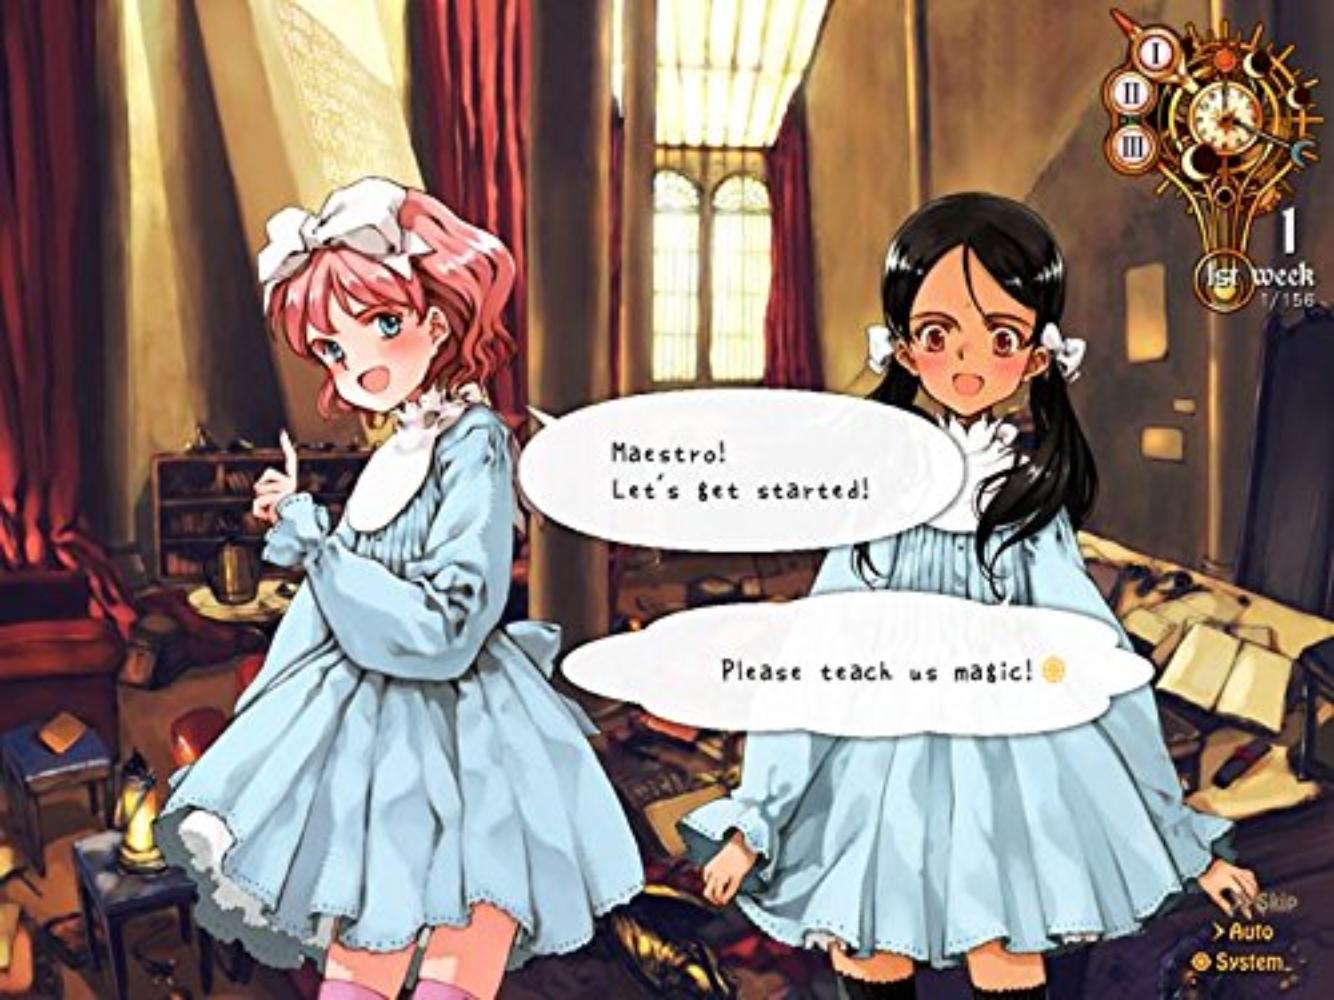 Littlewitch Romanesque Wallpapers